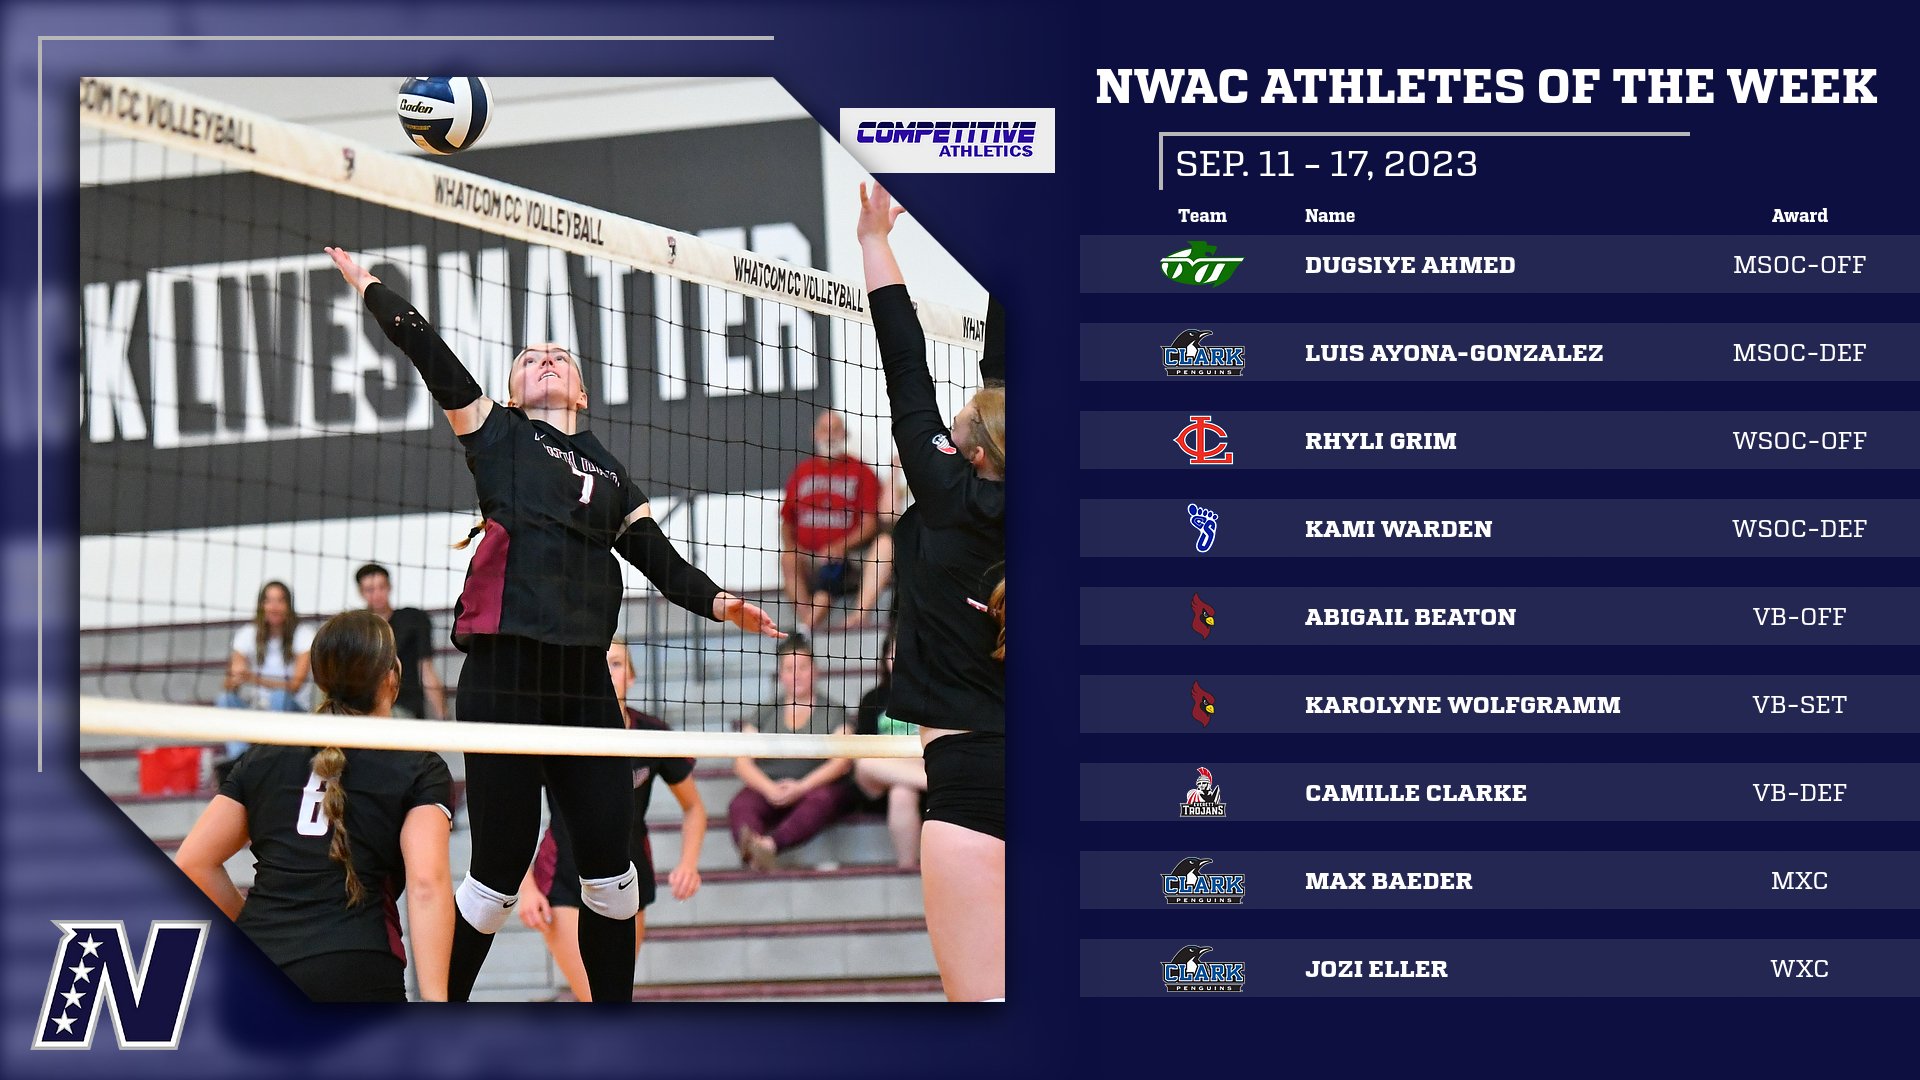  Competitive Athletics NWAC Athletes of the Week: Sep. 11 - 17, 2023